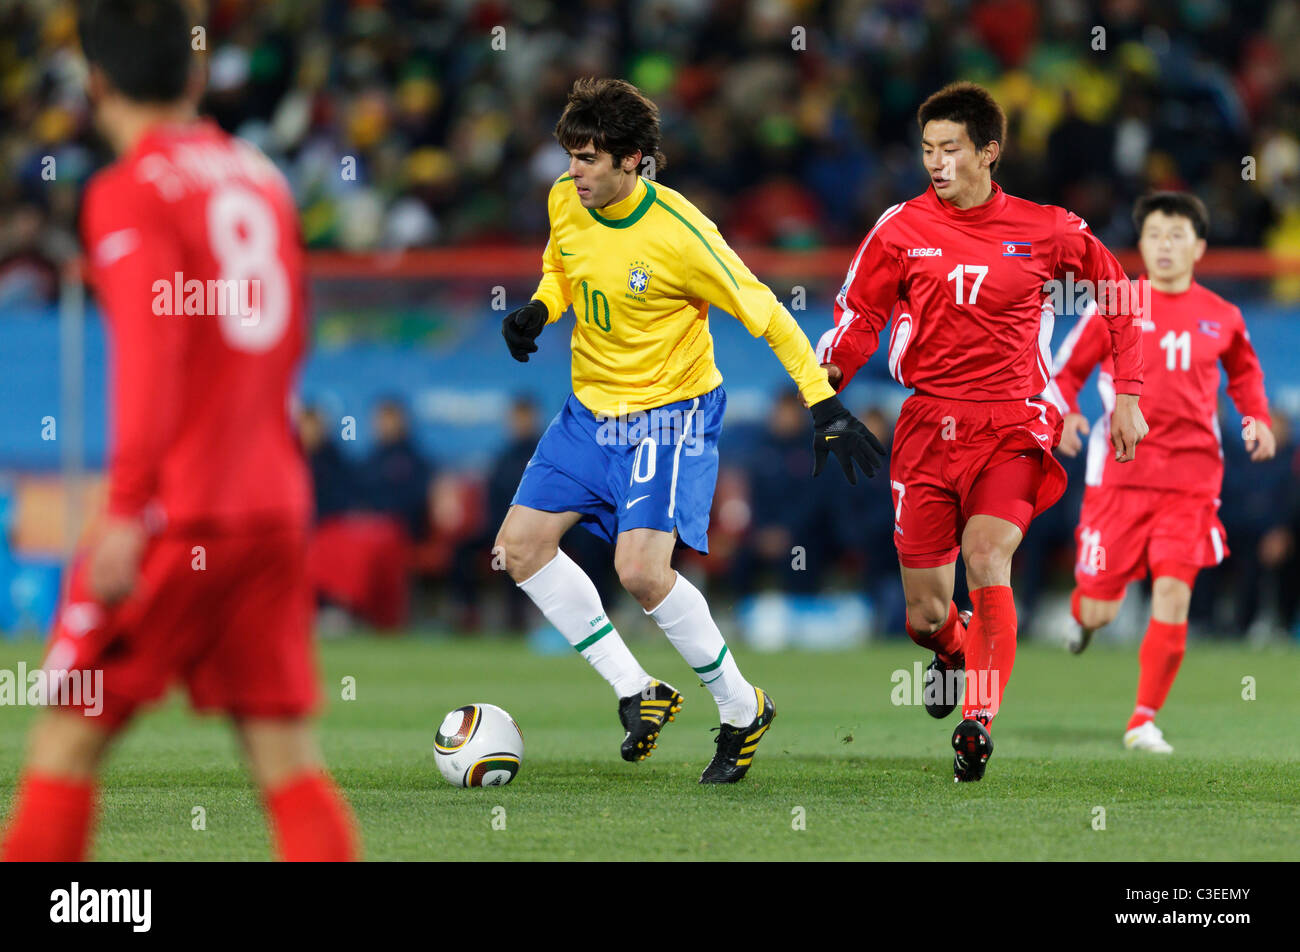 Kaka of Brazil (10) controls the ball against Yong Hak An of North Korea (17) during a 2010 FIFA World Cup football match. Stock Photo